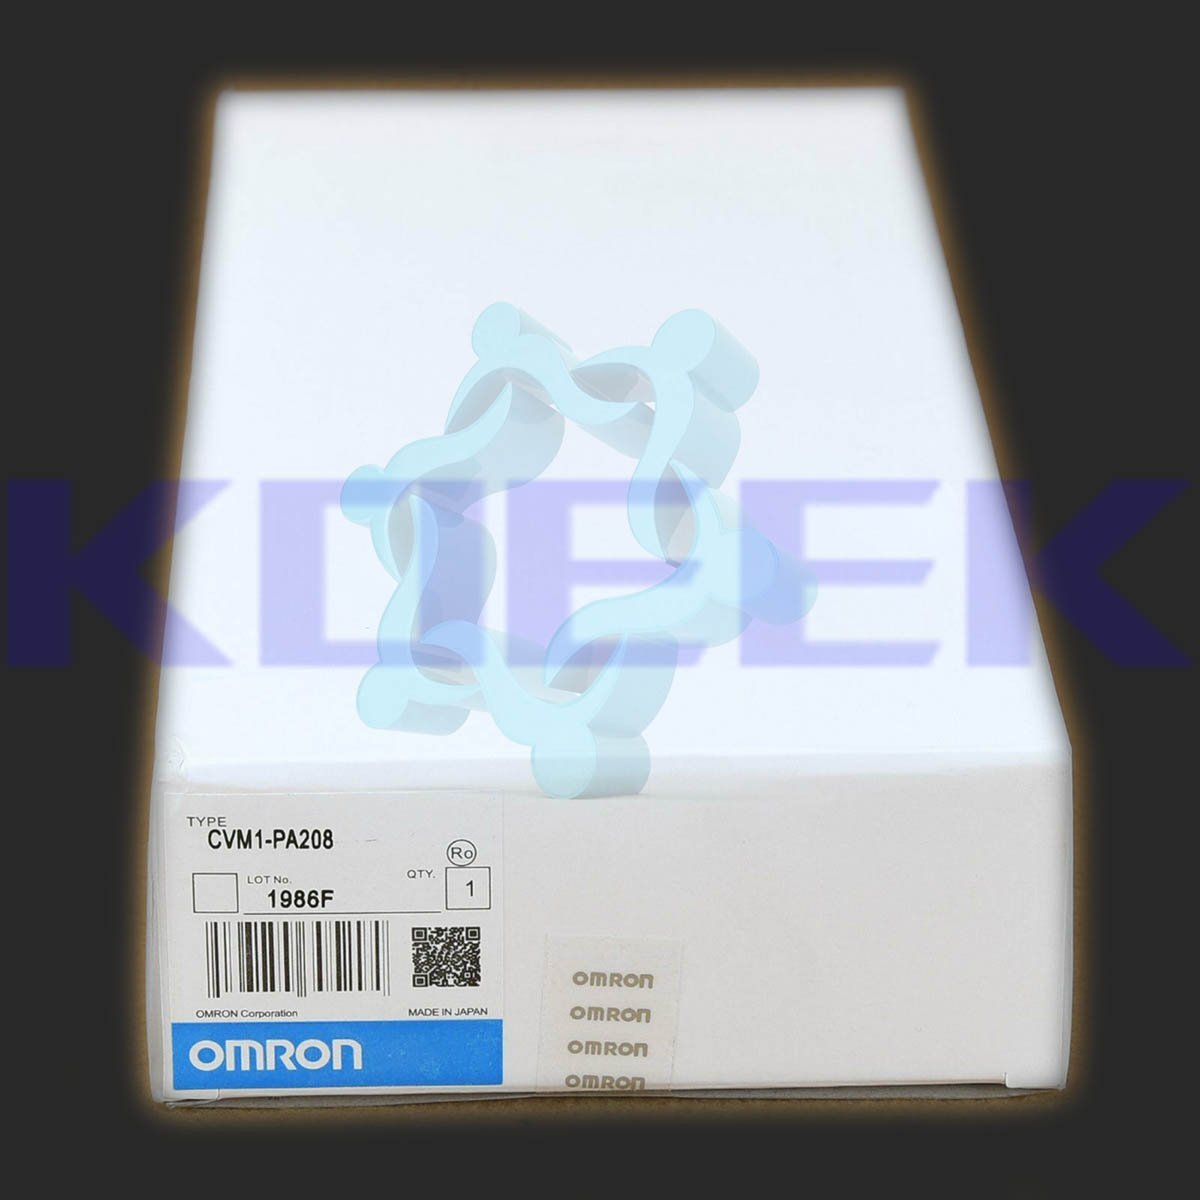 CVM1-PA208 KOEED 500+, 80%, import_2020_10_10_031751, Omron, Other